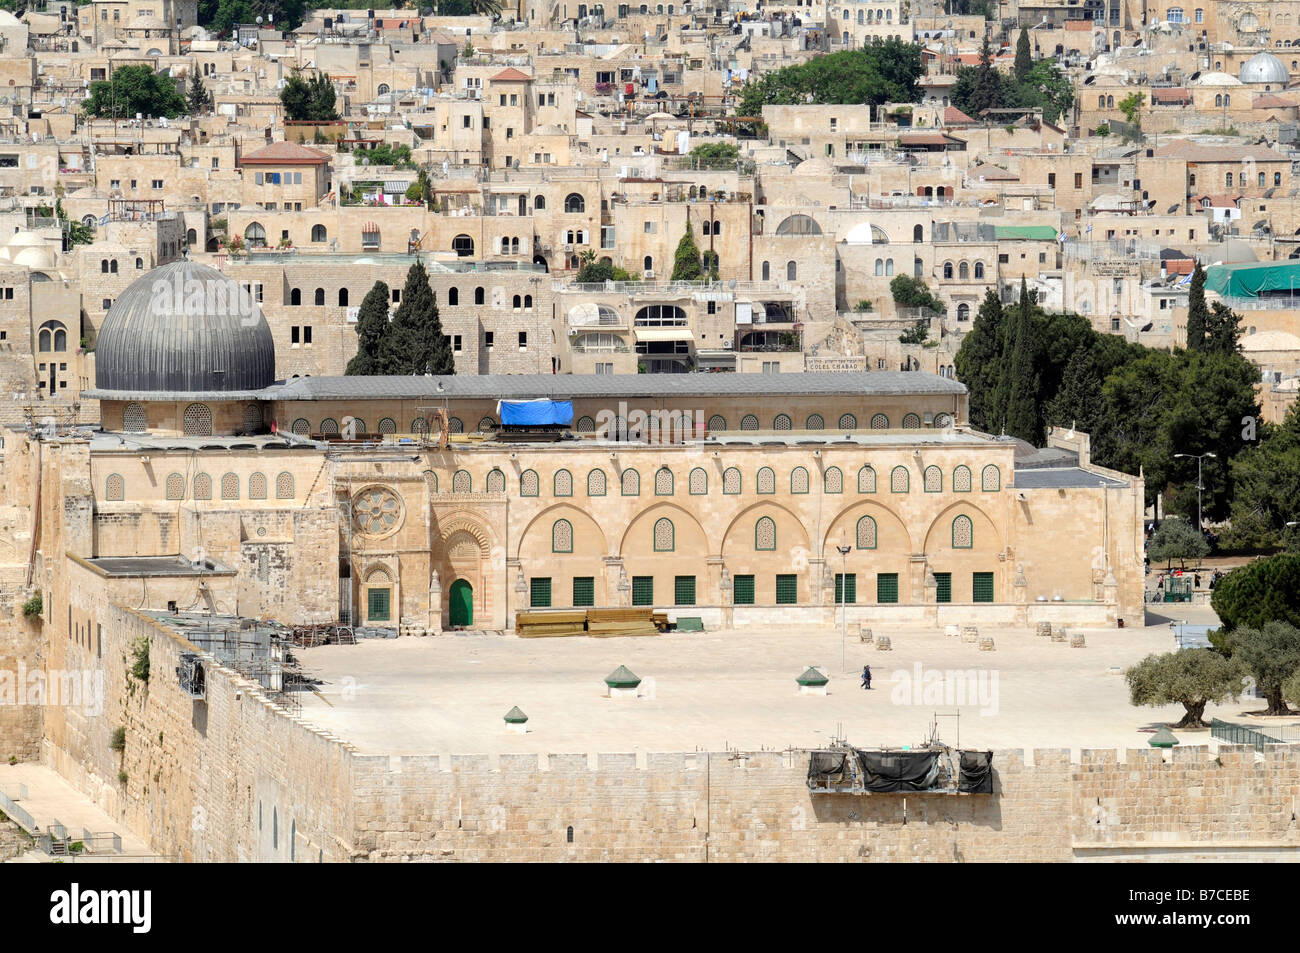 View of Al-Aqsa mosque, a Muslim holy place located on the Temple Mount in Jerusalem. Stock Photo